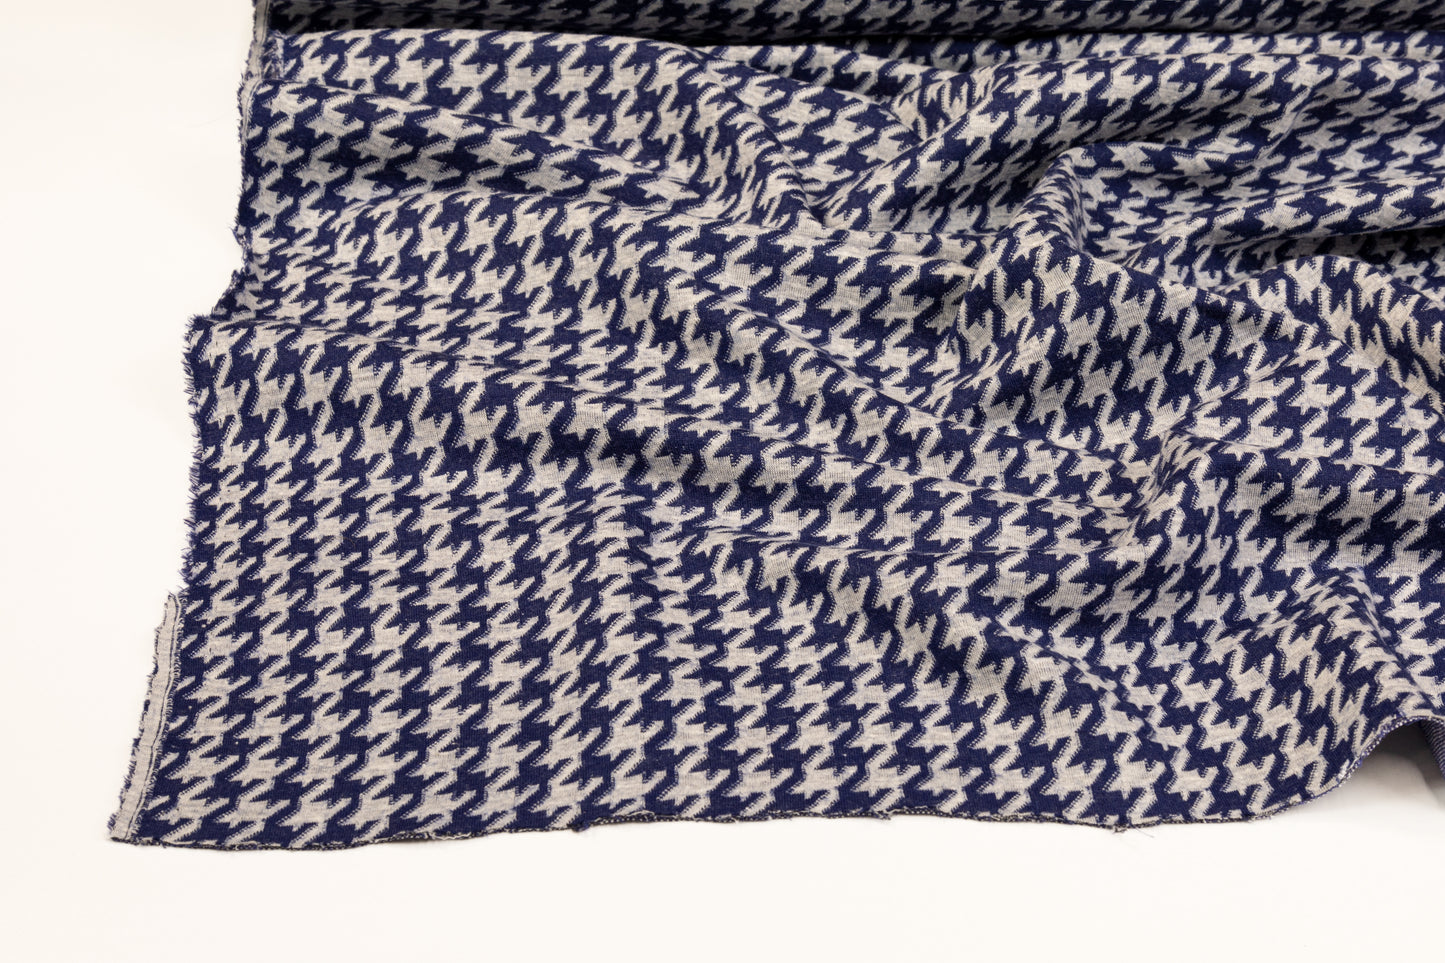 Houndstooth Cotton Jersey Knit - Blue and Off White